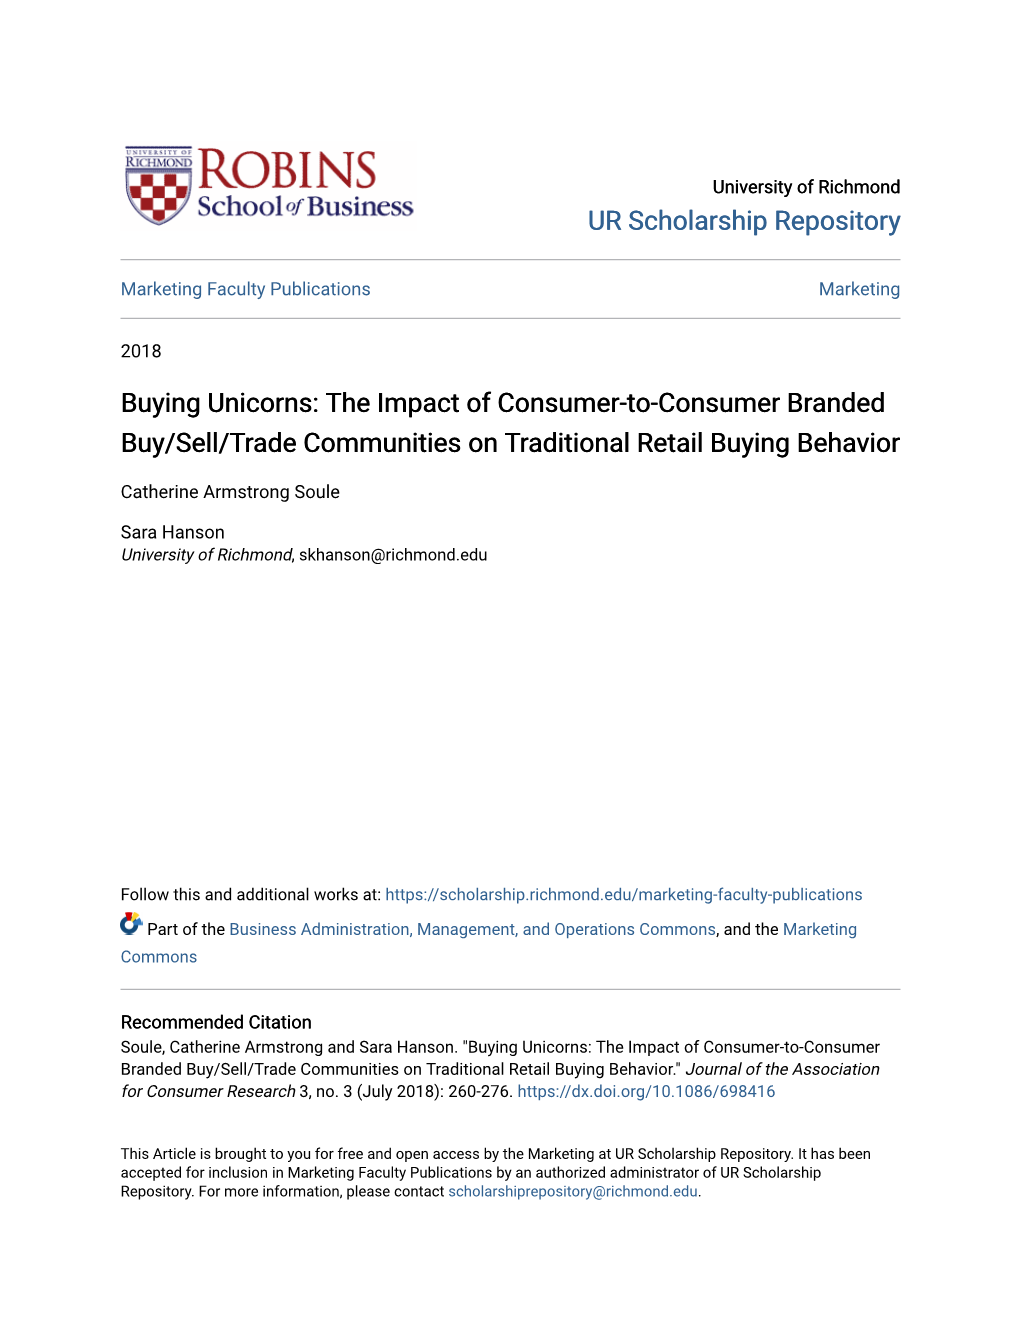 Buying Unicorns: the Impact of Consumer-To-Consumer Branded Buy/Sell/Trade Communities on Traditional Retail Buying Behavior